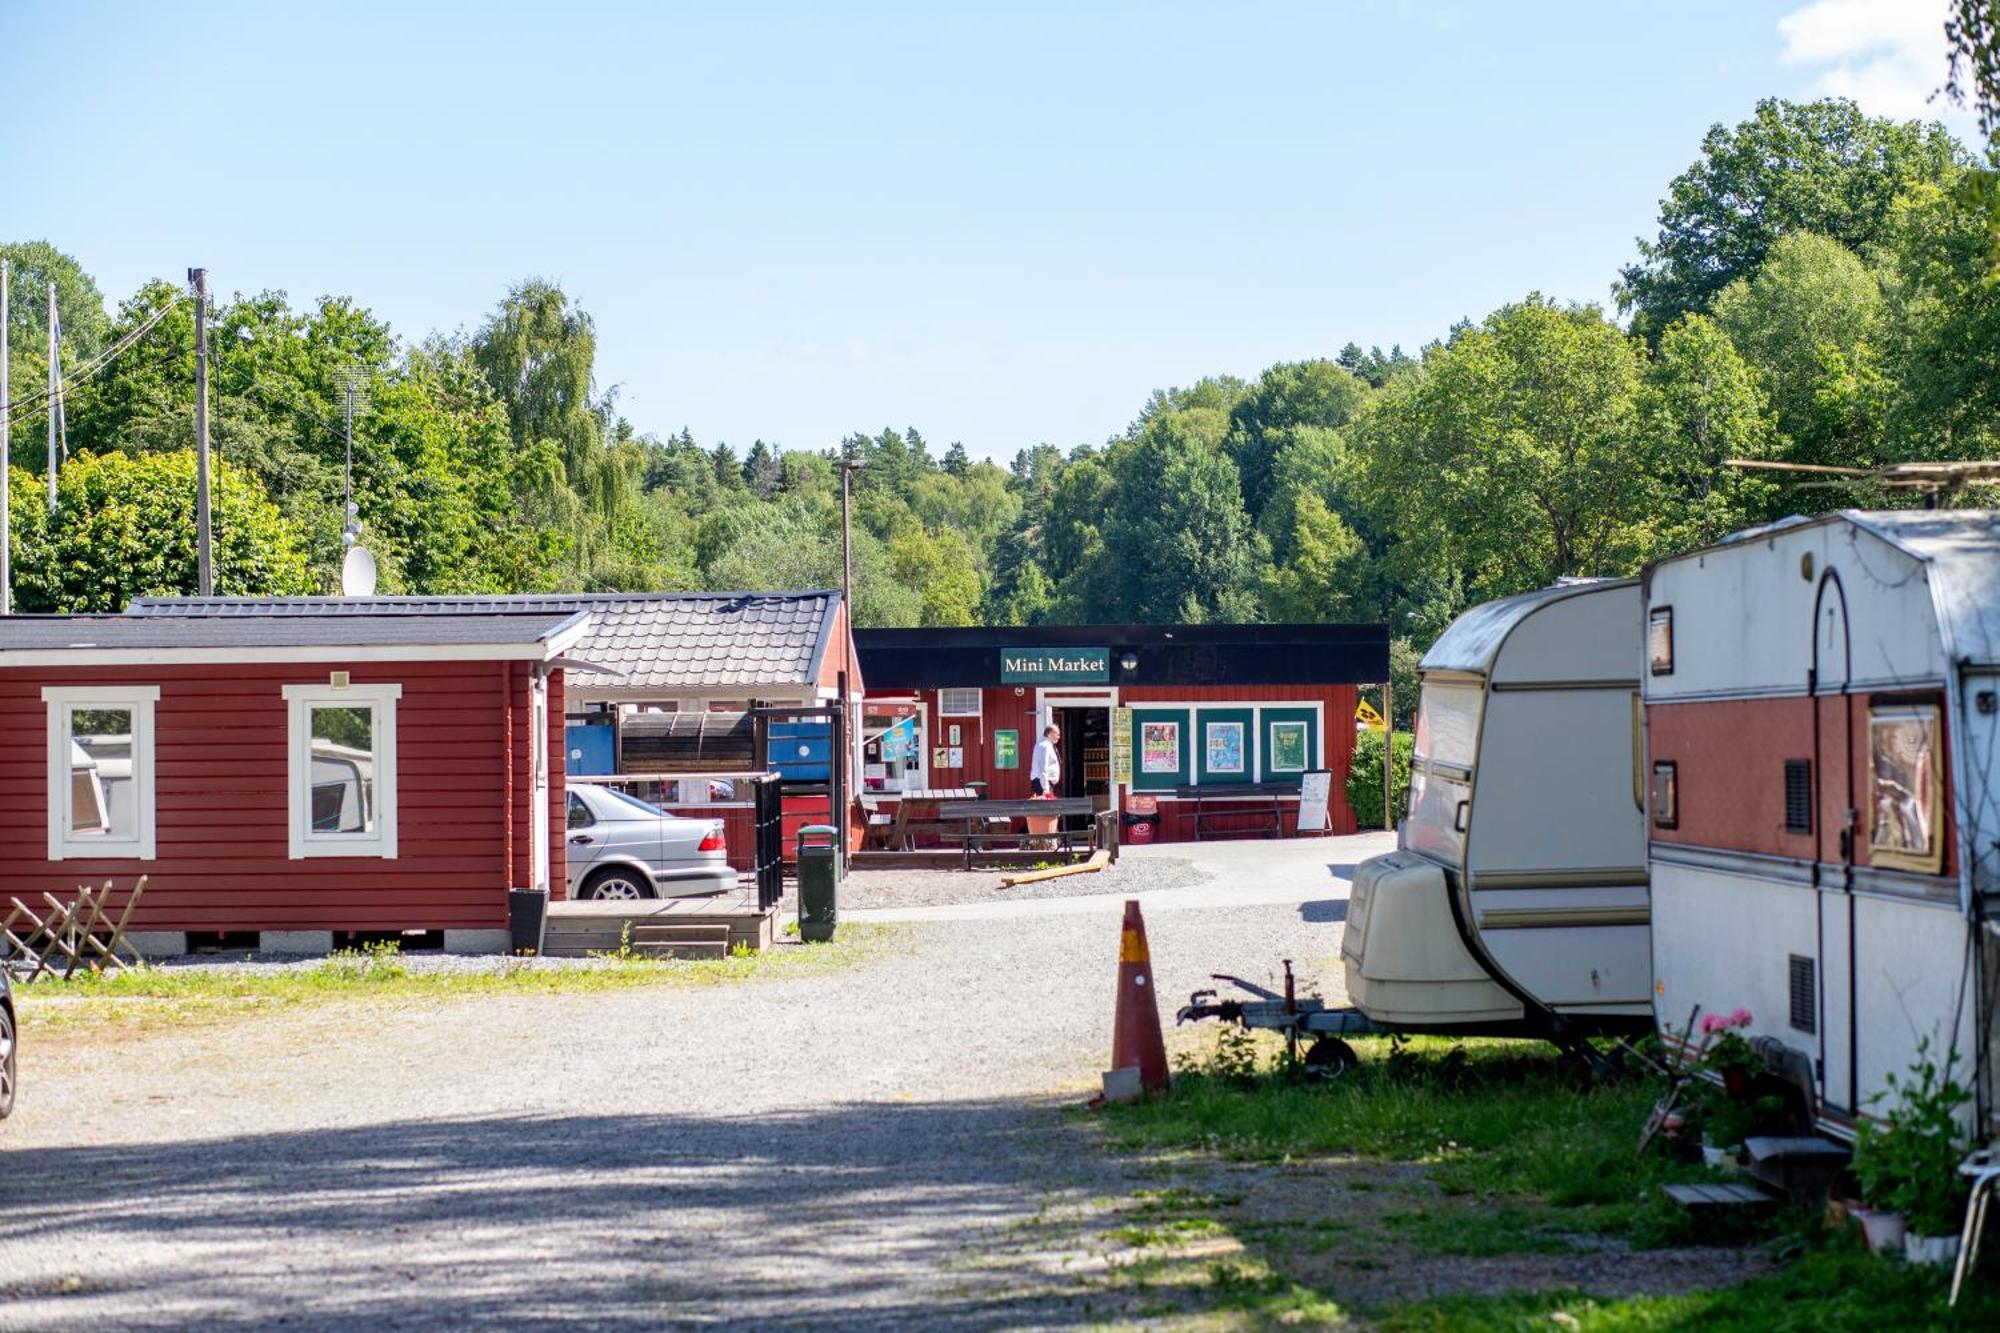 Stockholm Angby Camping酒店 外观 照片